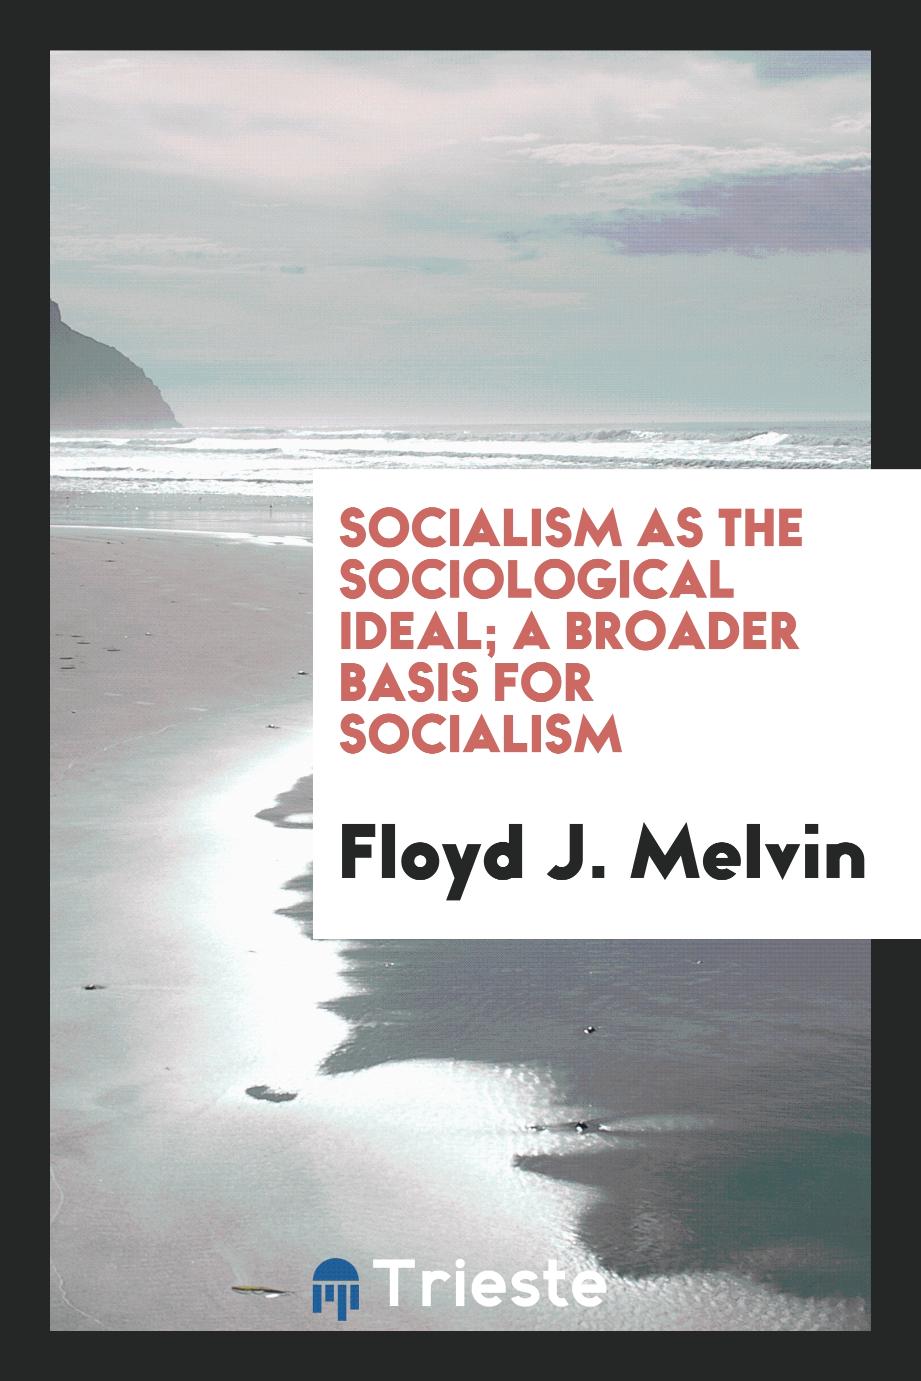 Socialism as the sociological ideal; a broader basis for socialism